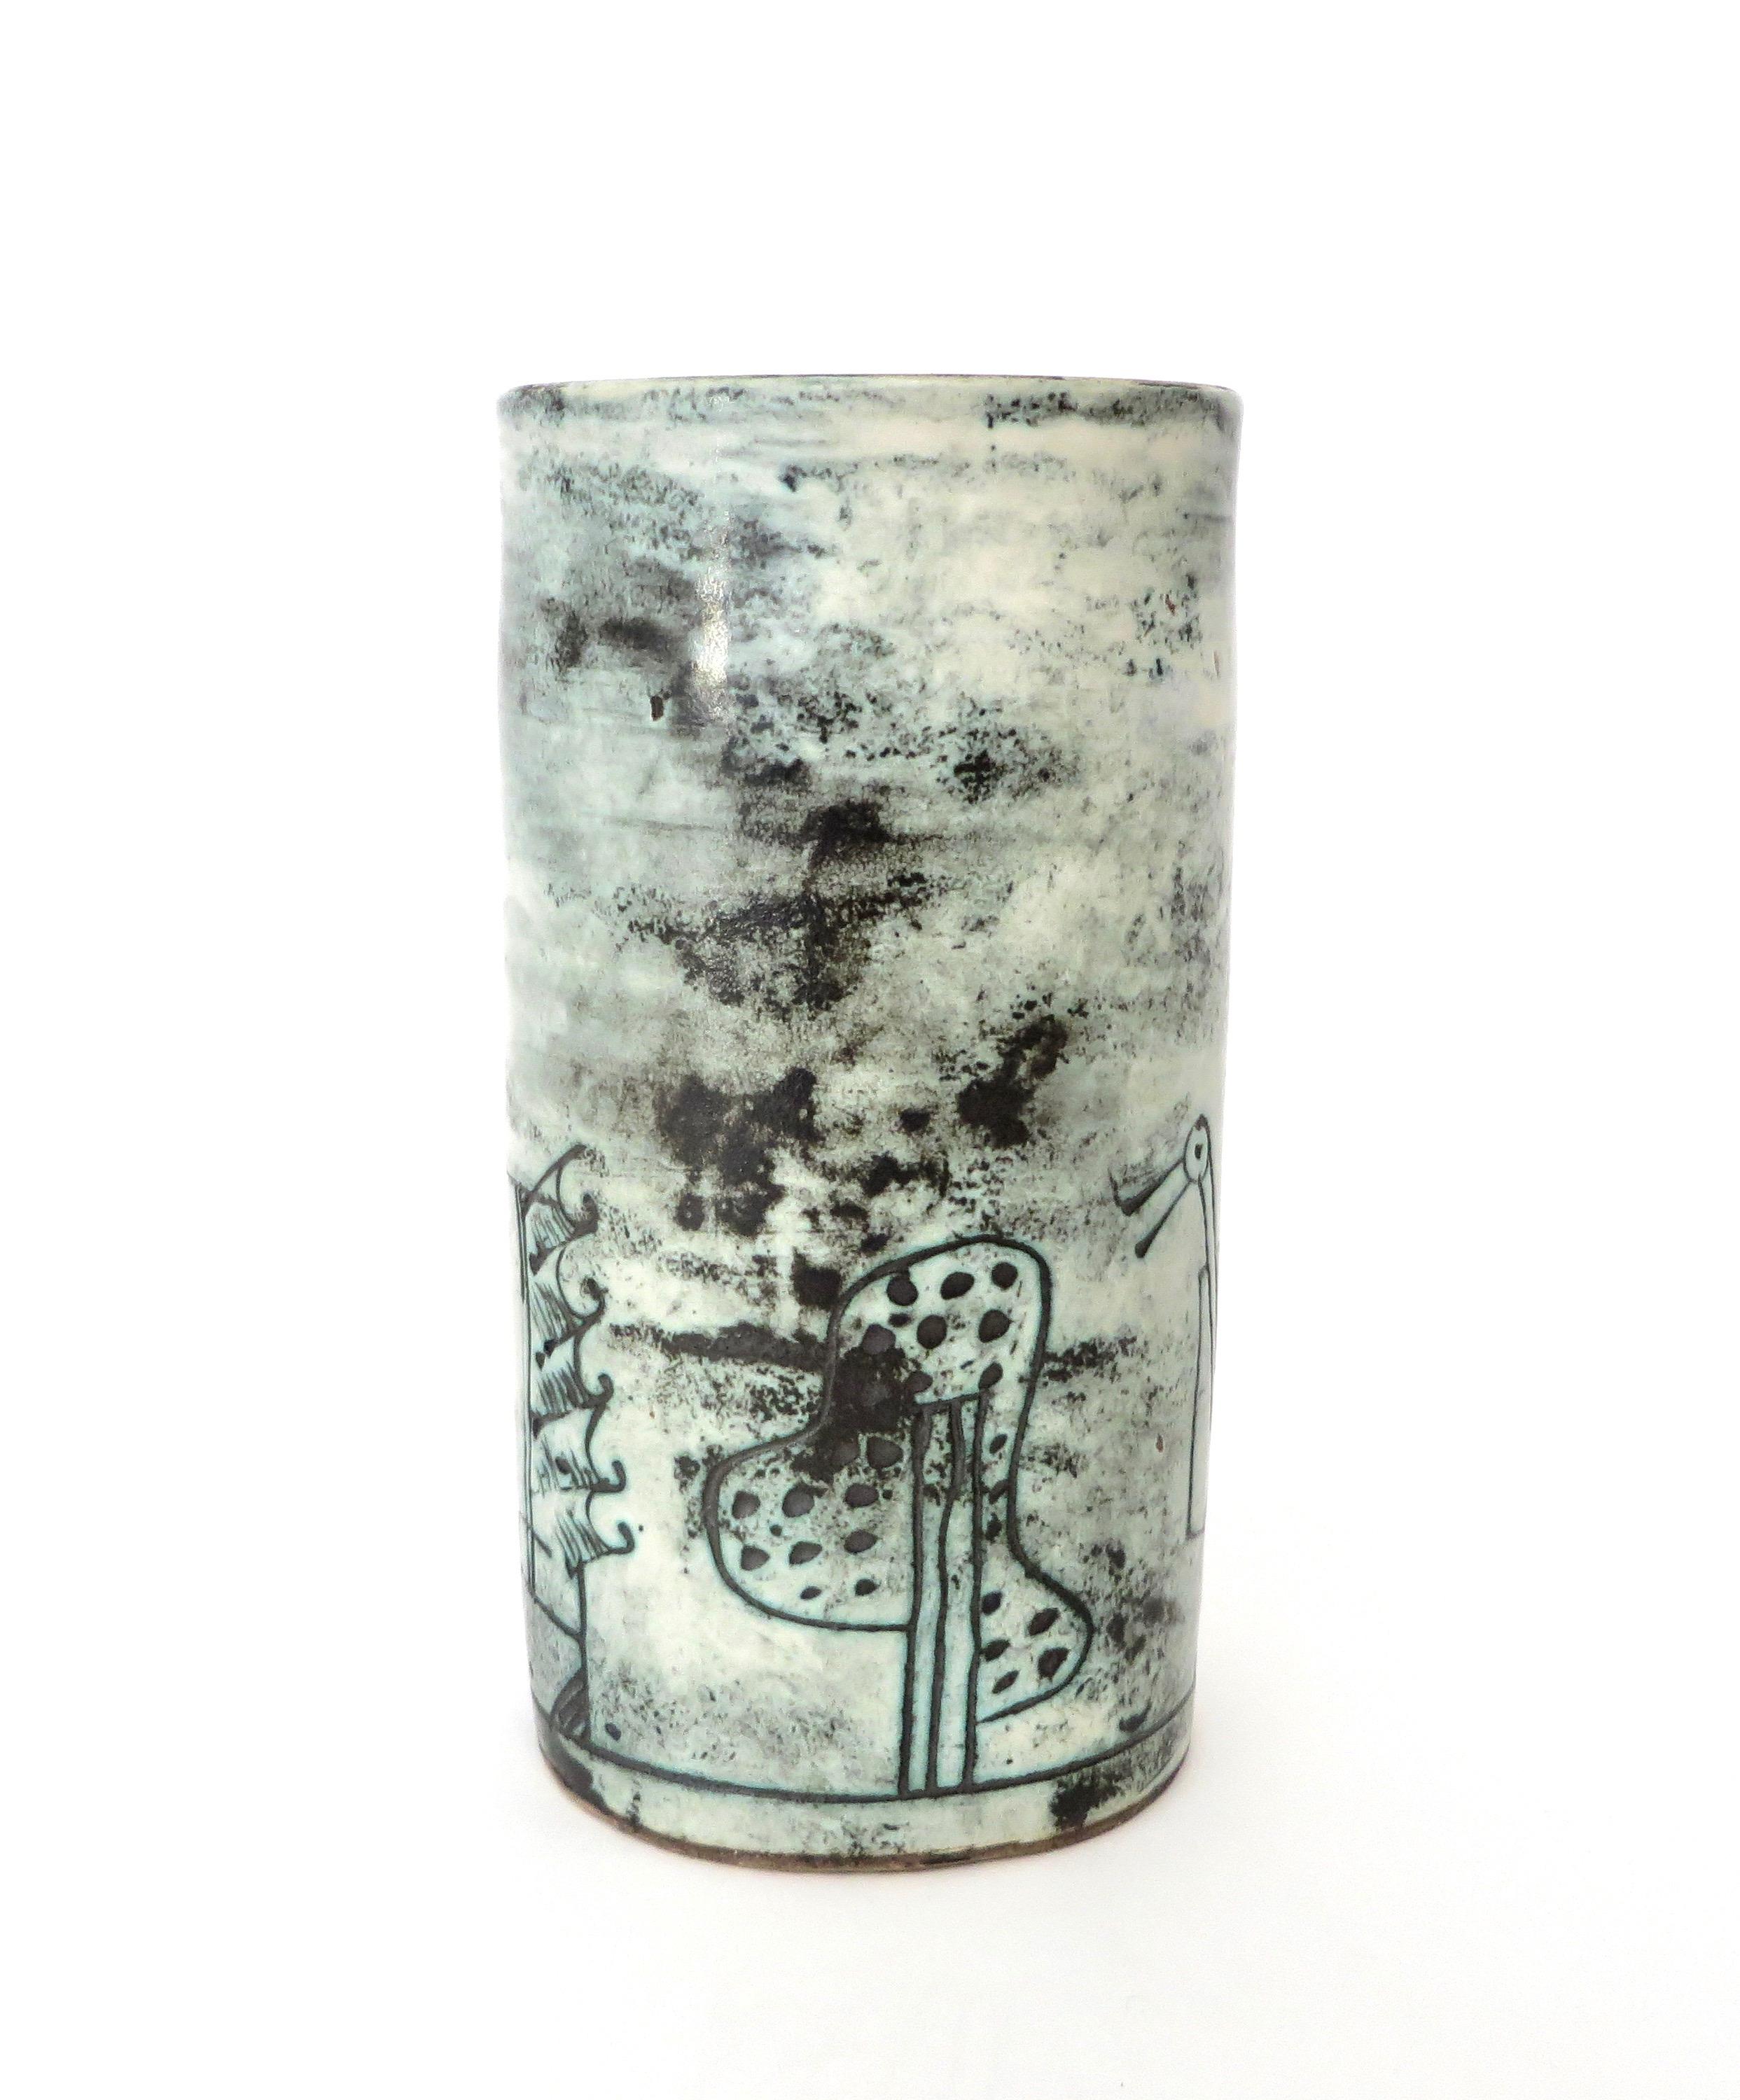 A French ceramic vase cylinder by noted artist Jacques Blin with wonderful image of a bird in his iconic light blue glaze and sgraffito decoration. No chips or restorations. Signed. 
La Céramique Francaise des Années 50. Pierre Staudenmeyer, pp